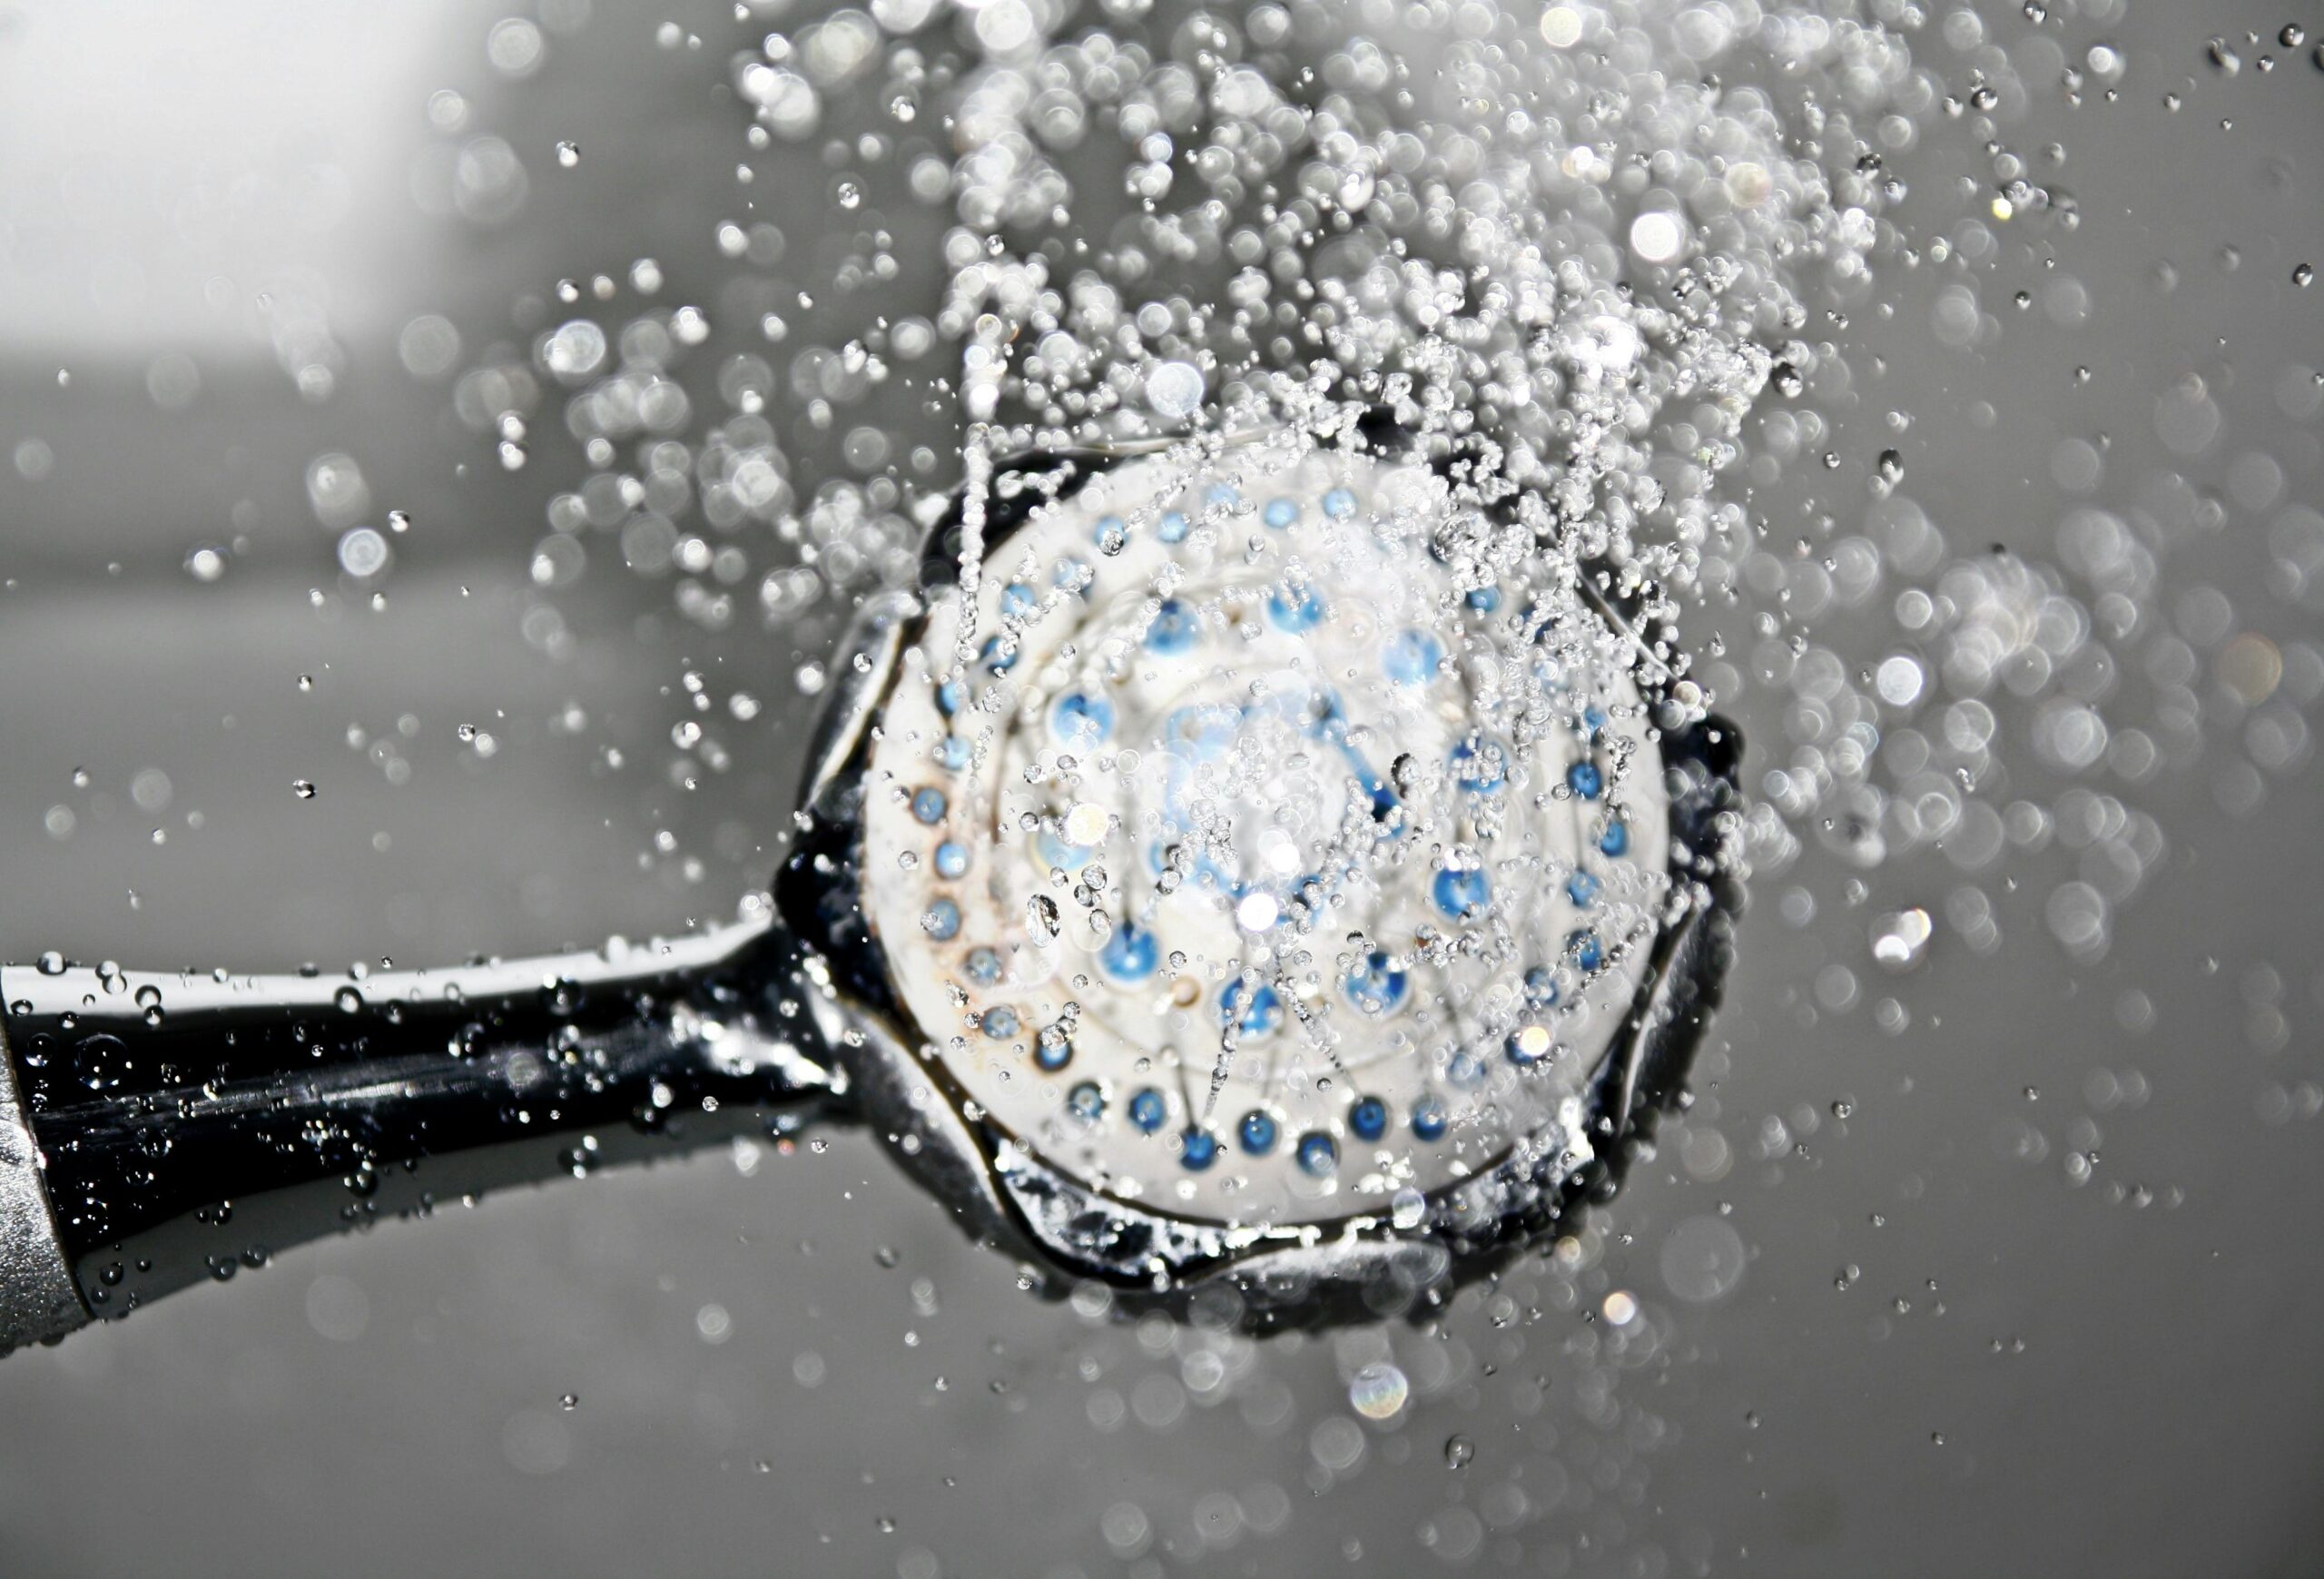 A black shower head with water splashing out of it.